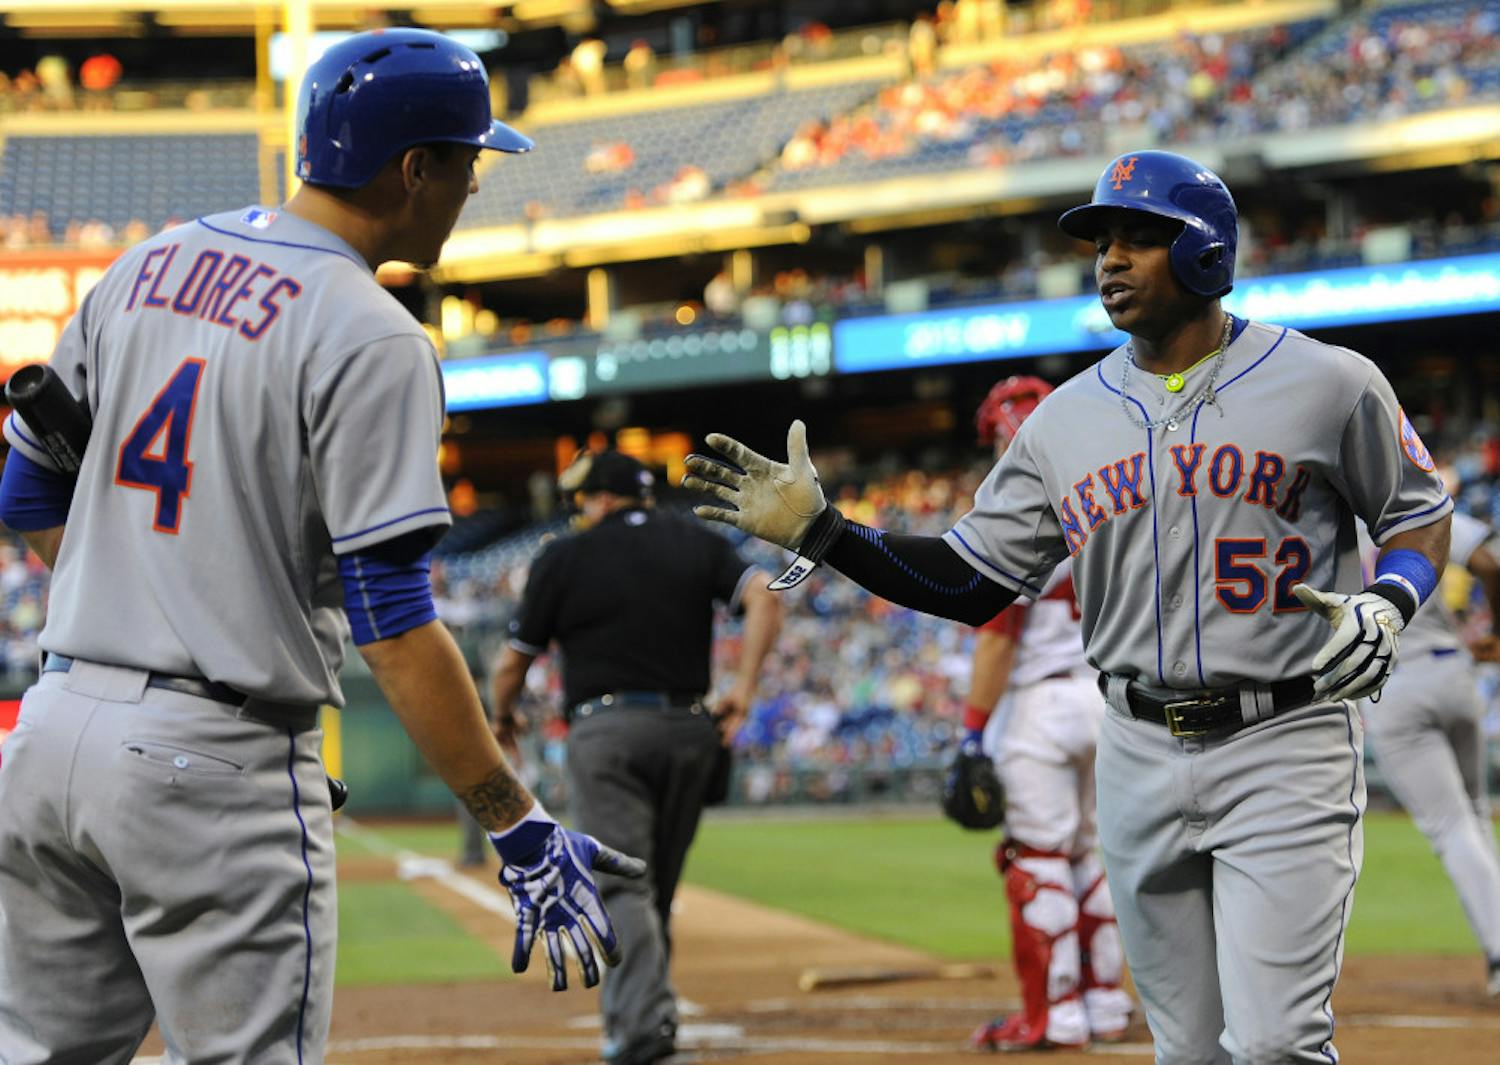 New York Mets' Yoenis Cespedes (52) celebrates with teammate Wilmer Flores after scoring a run on a Michael Cuddyer double in the first inning of a baseball game against the Philadelphia Phillies, Wednesday, Aug. 26, 2015, in Philadelphia. (AP Photo/Michael Perez)